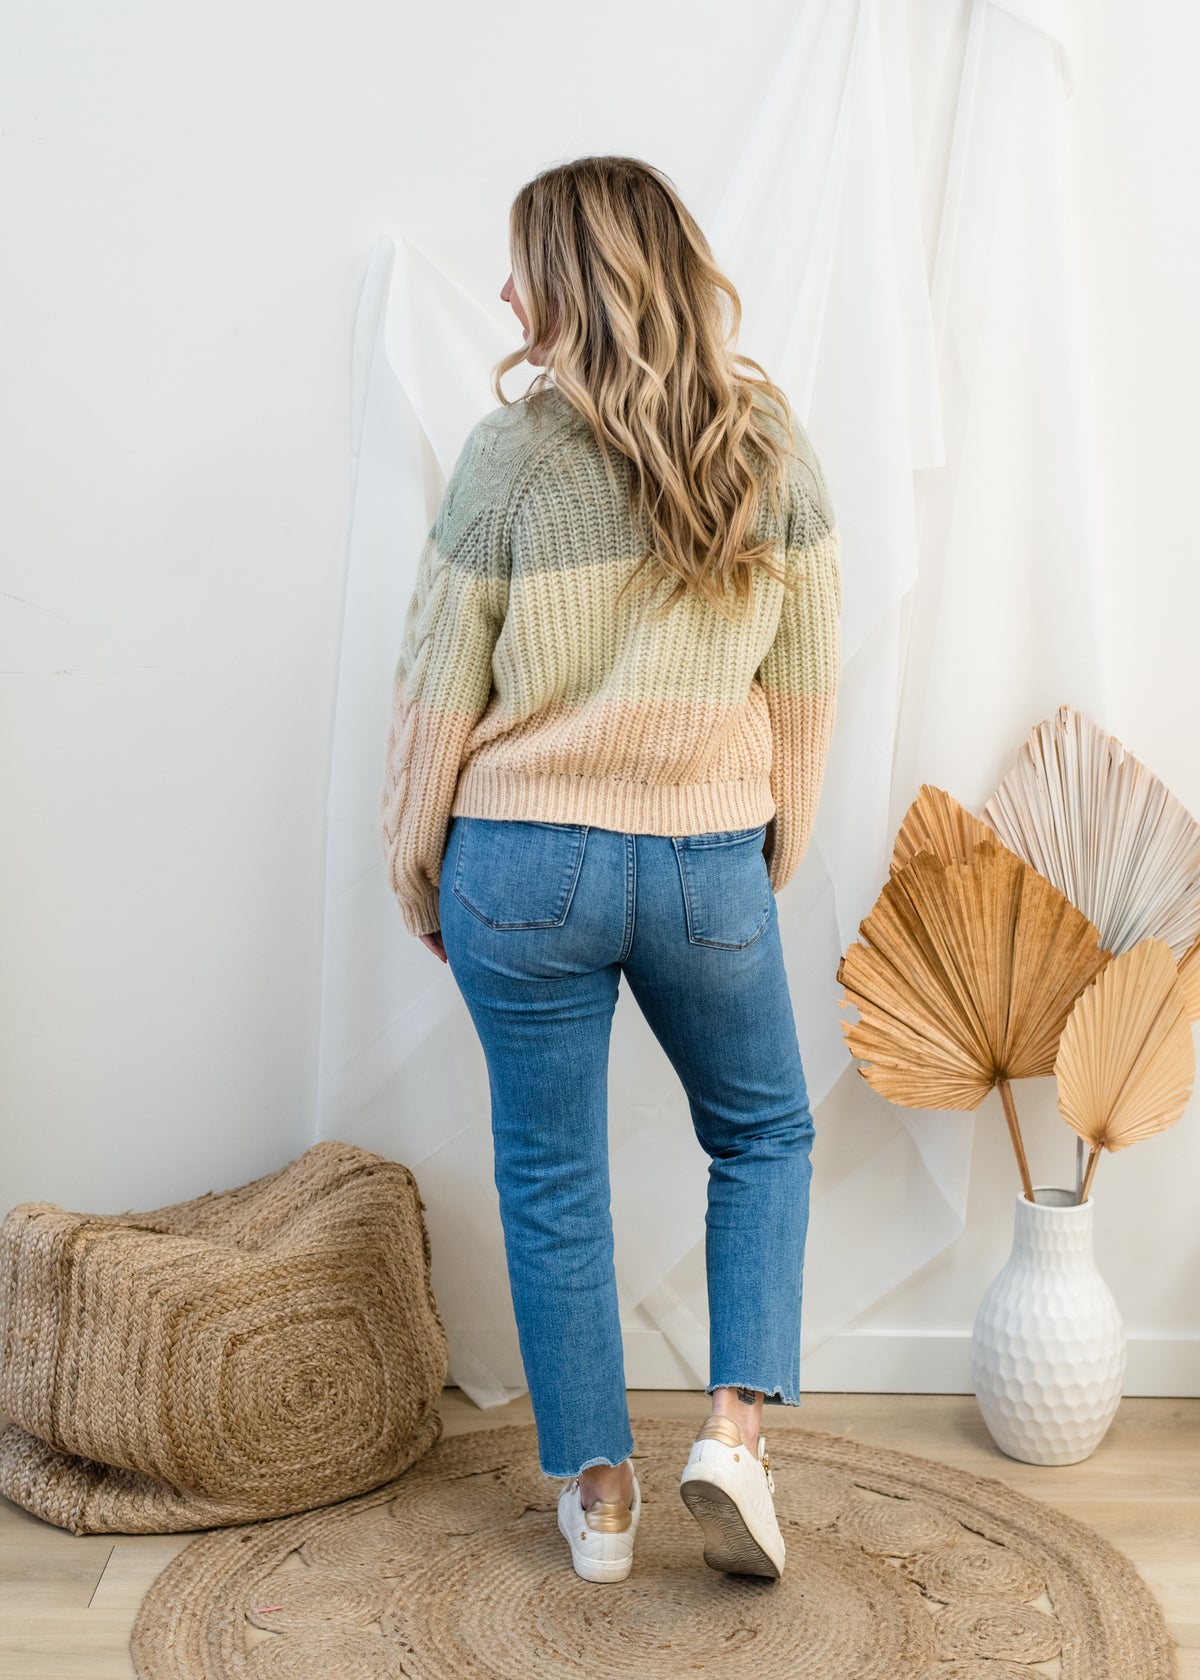 The Whistler Knit Sweater